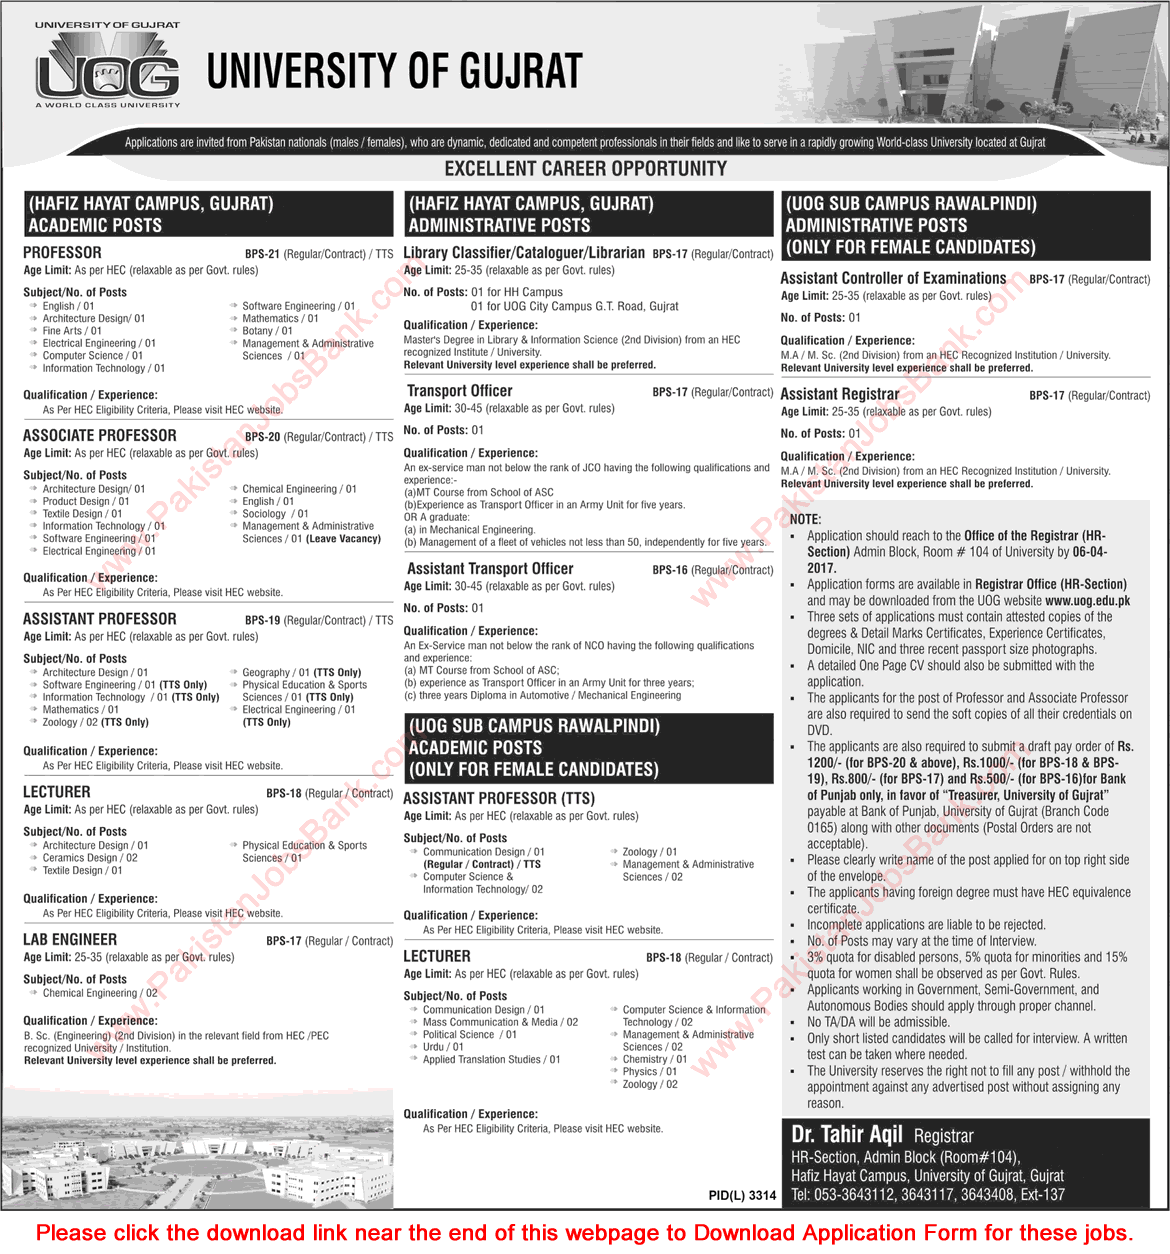 University of Gujrat Jobs March 2017 Application Form Teaching Faculty & Administrative Staff Latest